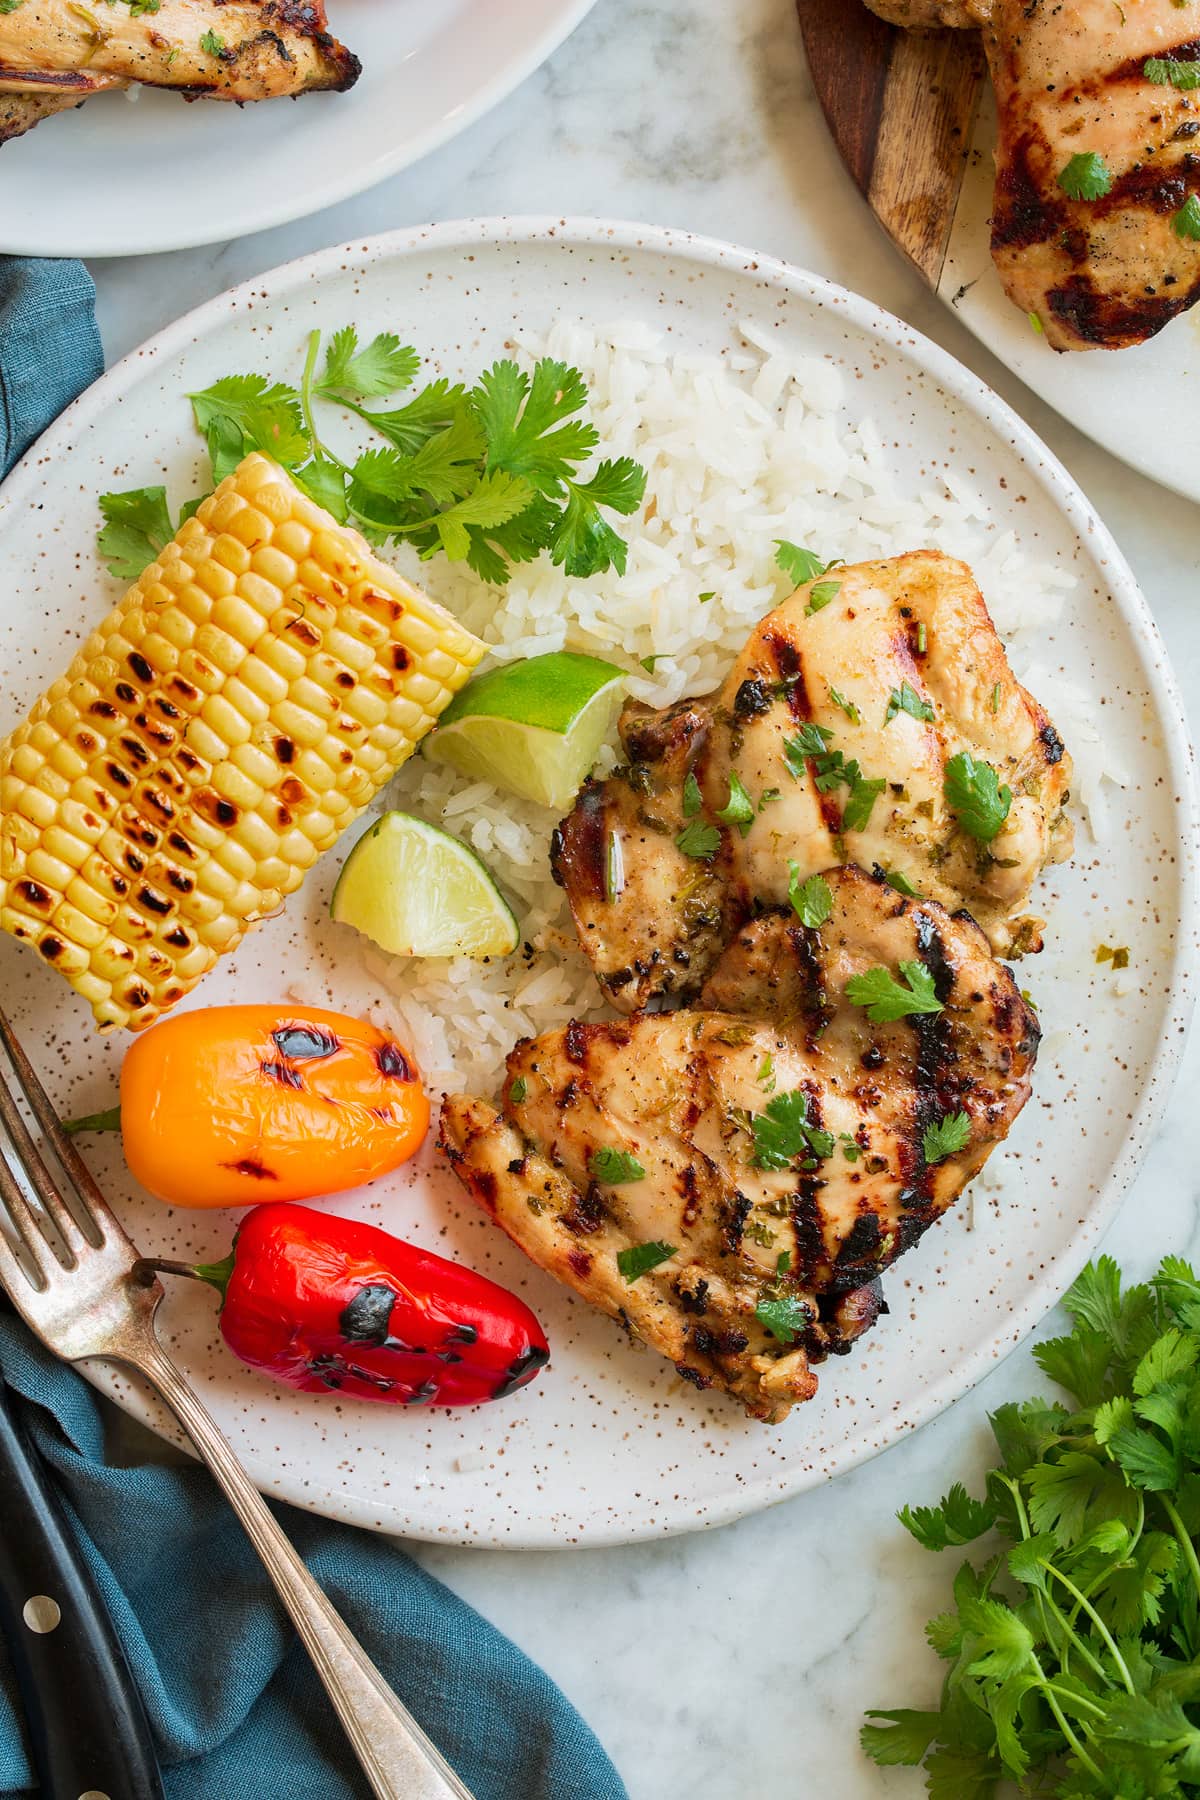 Serving suggestion shown for cilantro lime chicken thighs. Includes the thigh on a plate with a side of grilled peppers, corn and coconut rice.